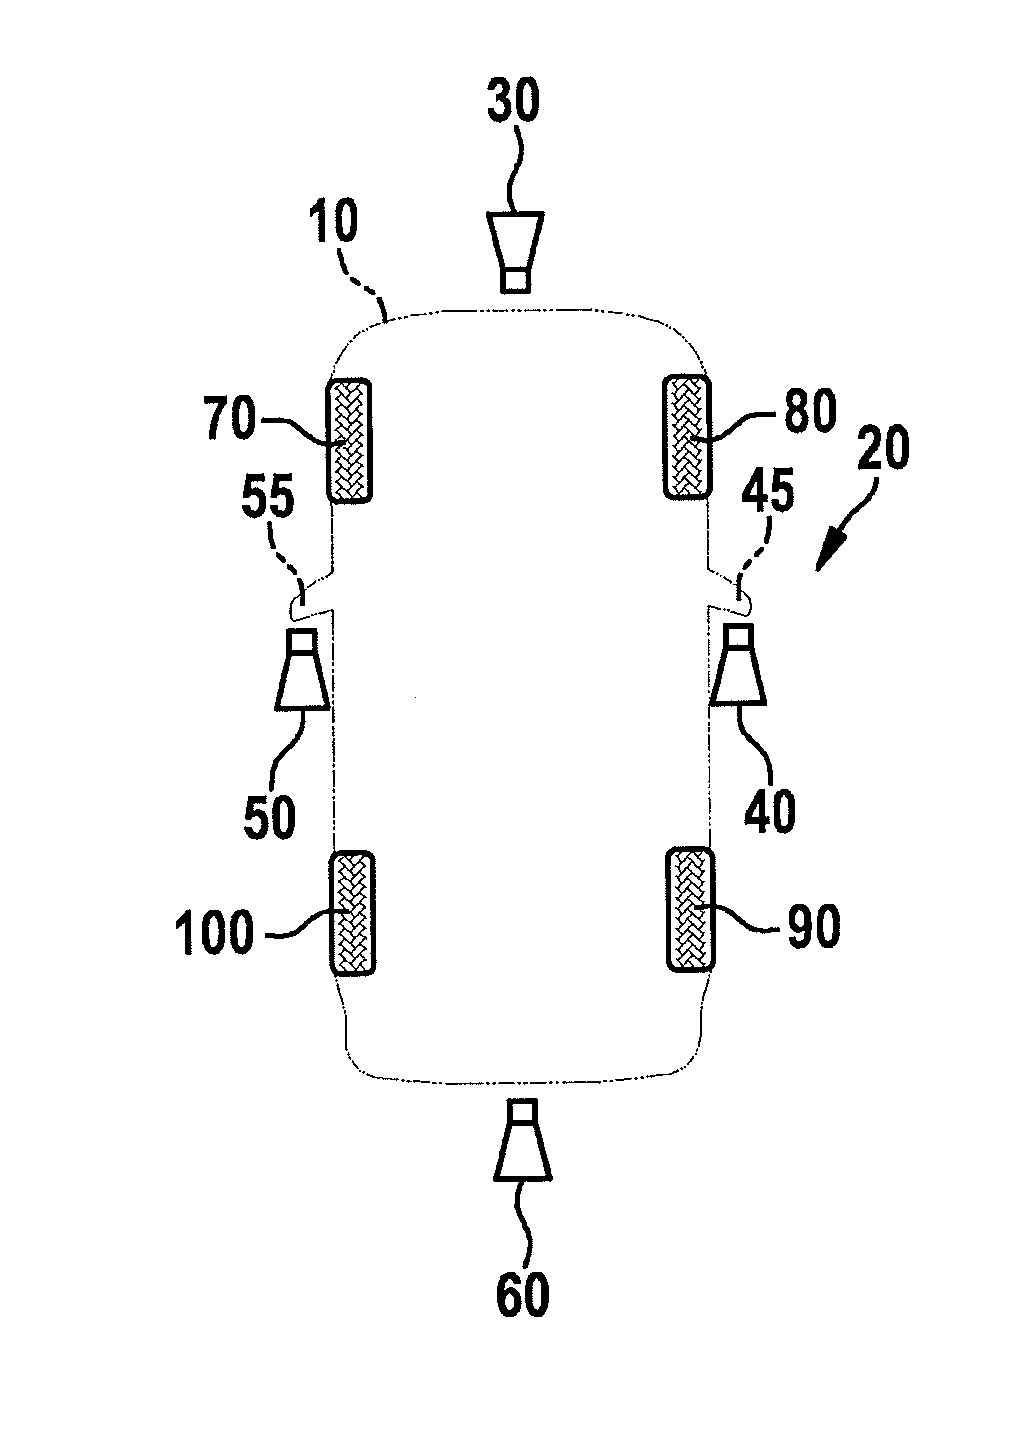 Method and vehicle assistance system for active warning and/or for navigation assistance to prevent a collosion of a vehicle body part and/or of a vehicle wheel with an object